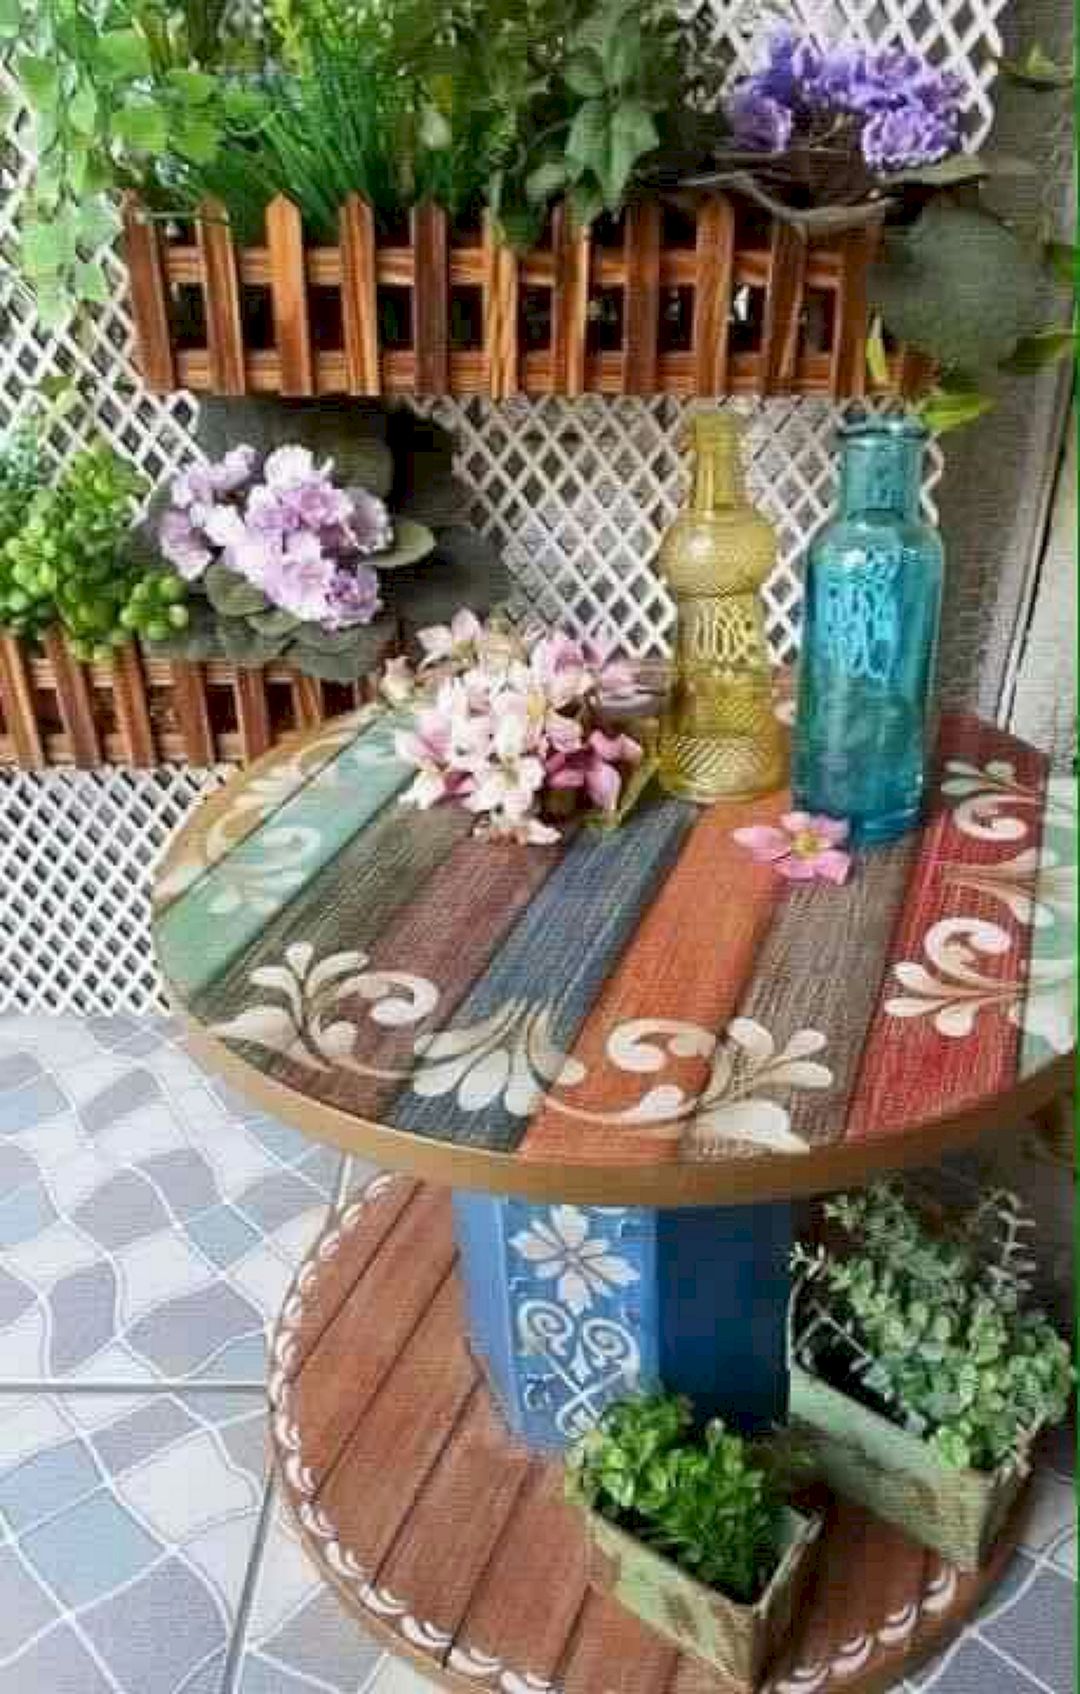 Marvelous Diy Recycled Wooden Spool Garden Table